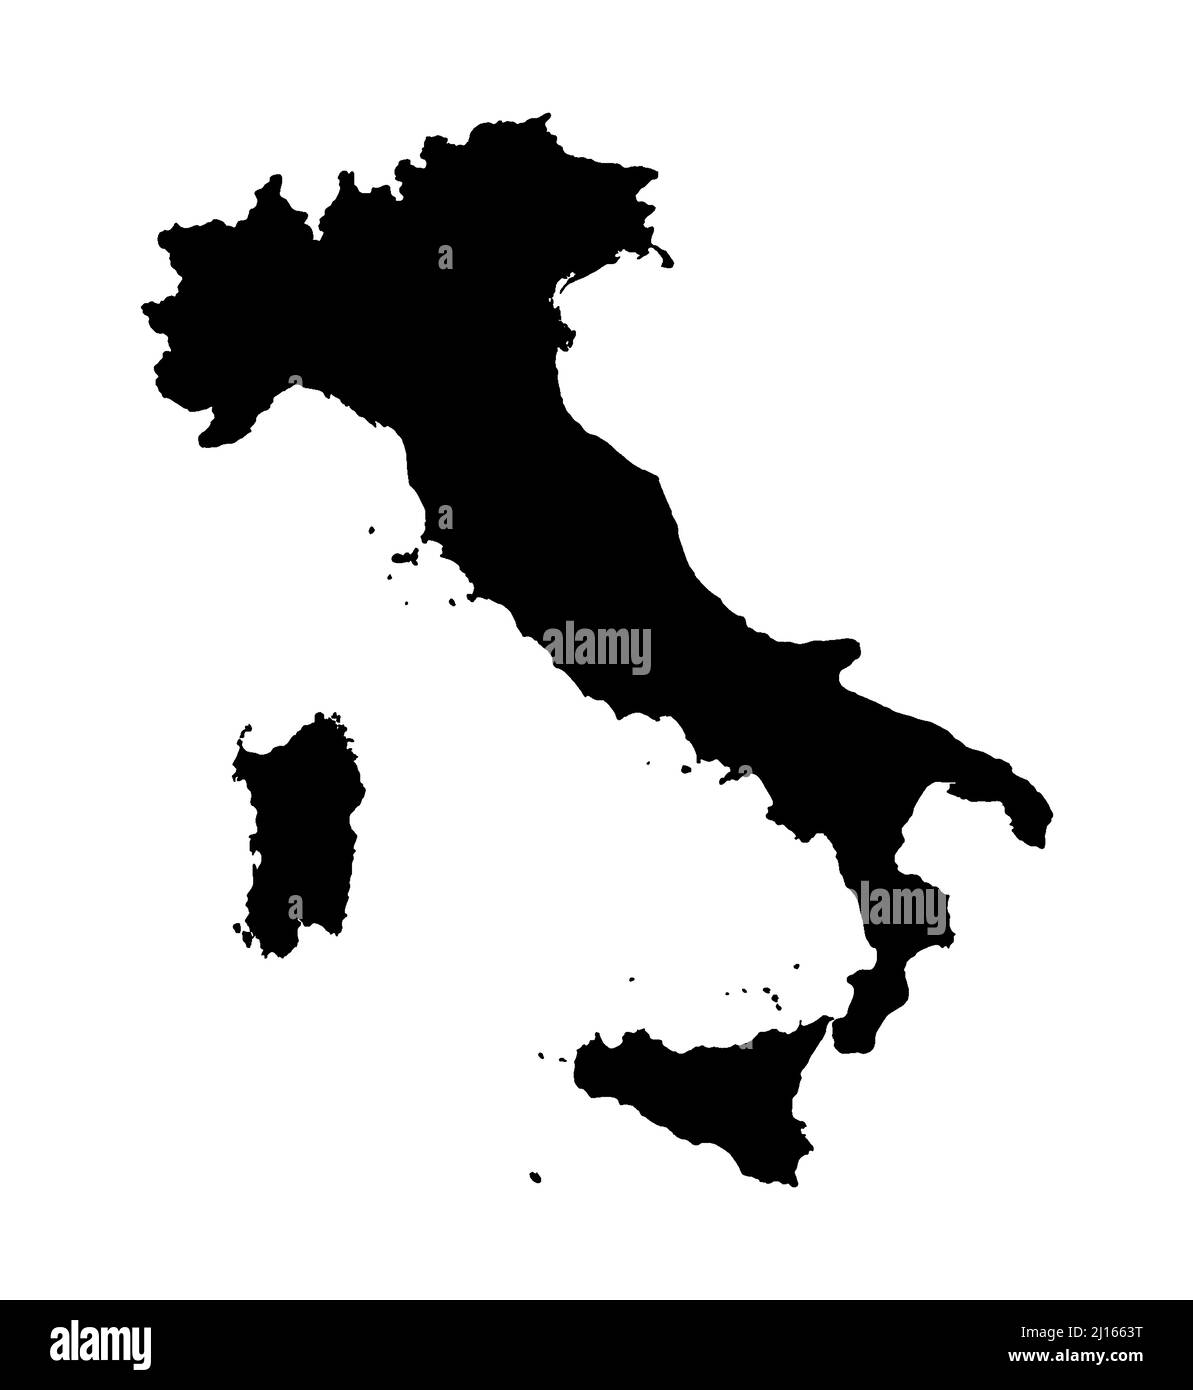 Outline silhouette map of Italy set over a white background Stock Photo